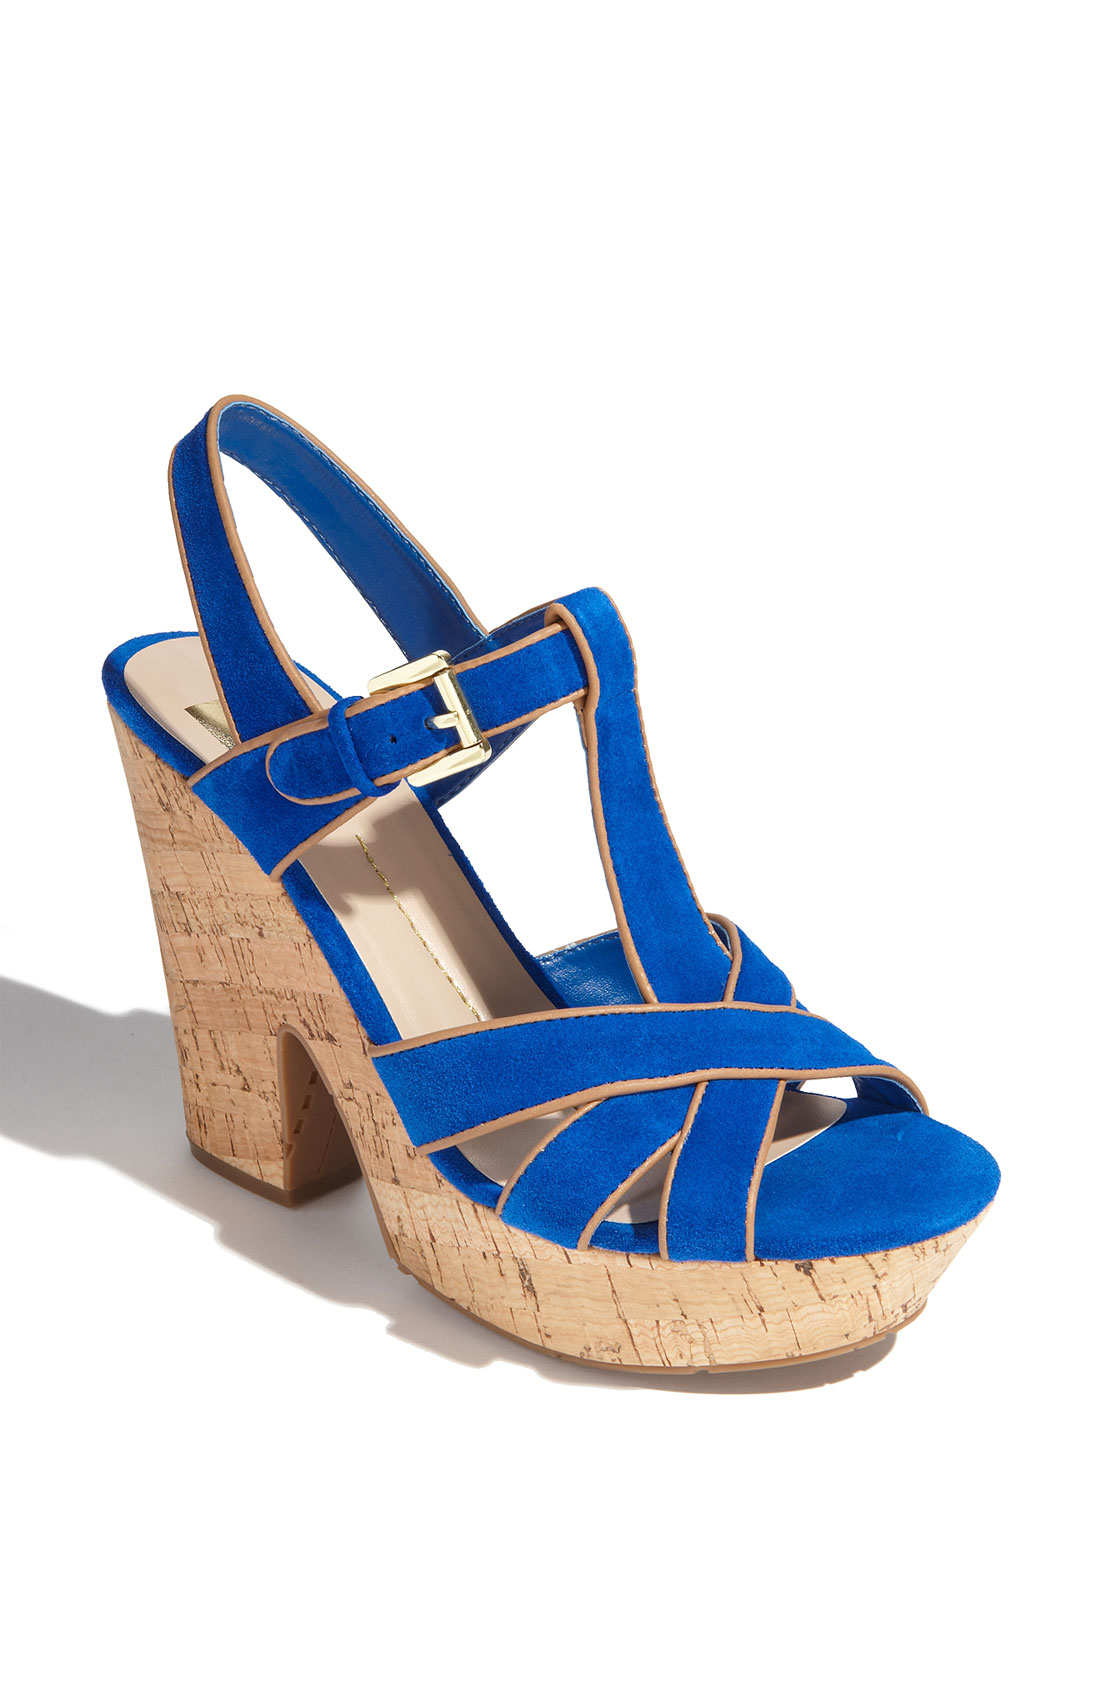 Dv By Dolce Vita Taiga Sandal in Blue (bright blue suede) | Lyst